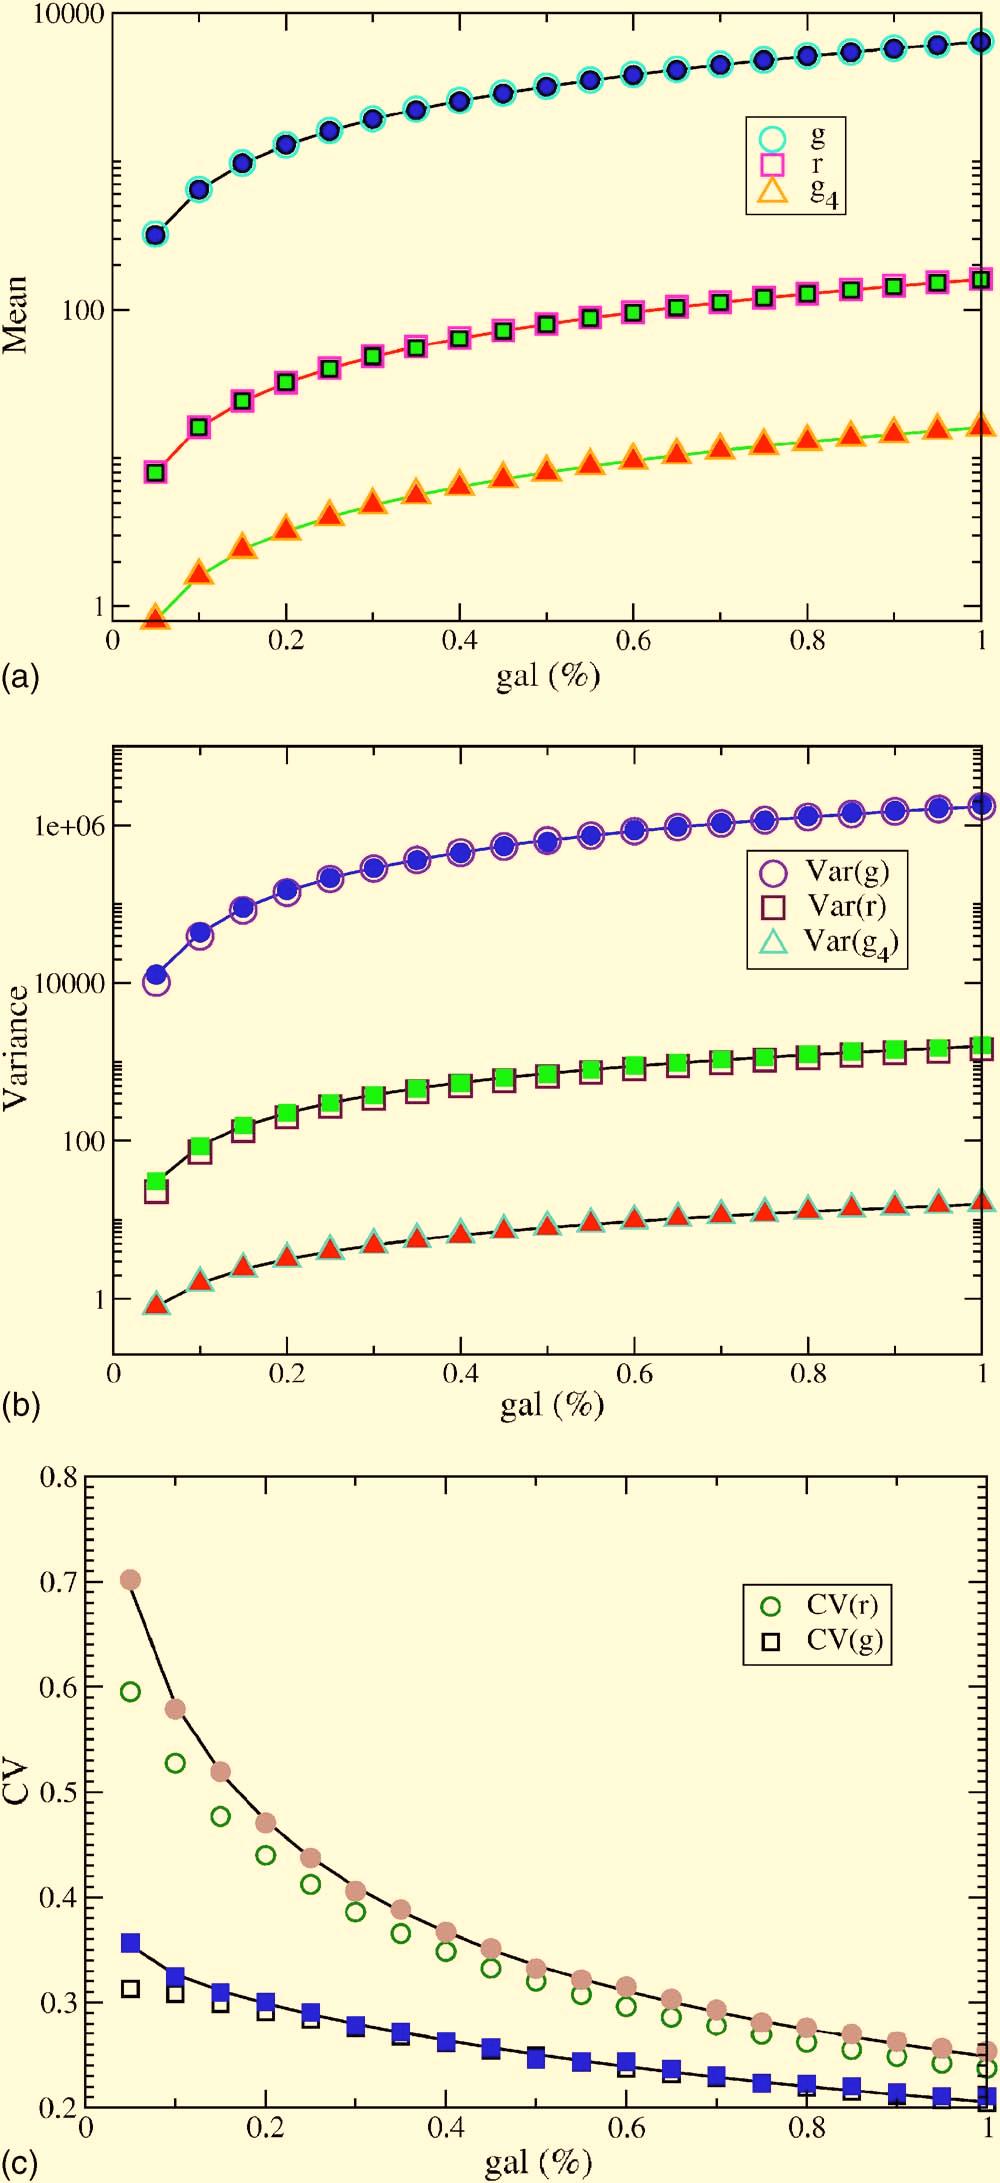 Mean level a, variance b, and coefficient of variation c as a function of galactose concentration gal obtained with direct Gillespie method solid symbols, stochastically driven mass-action equations